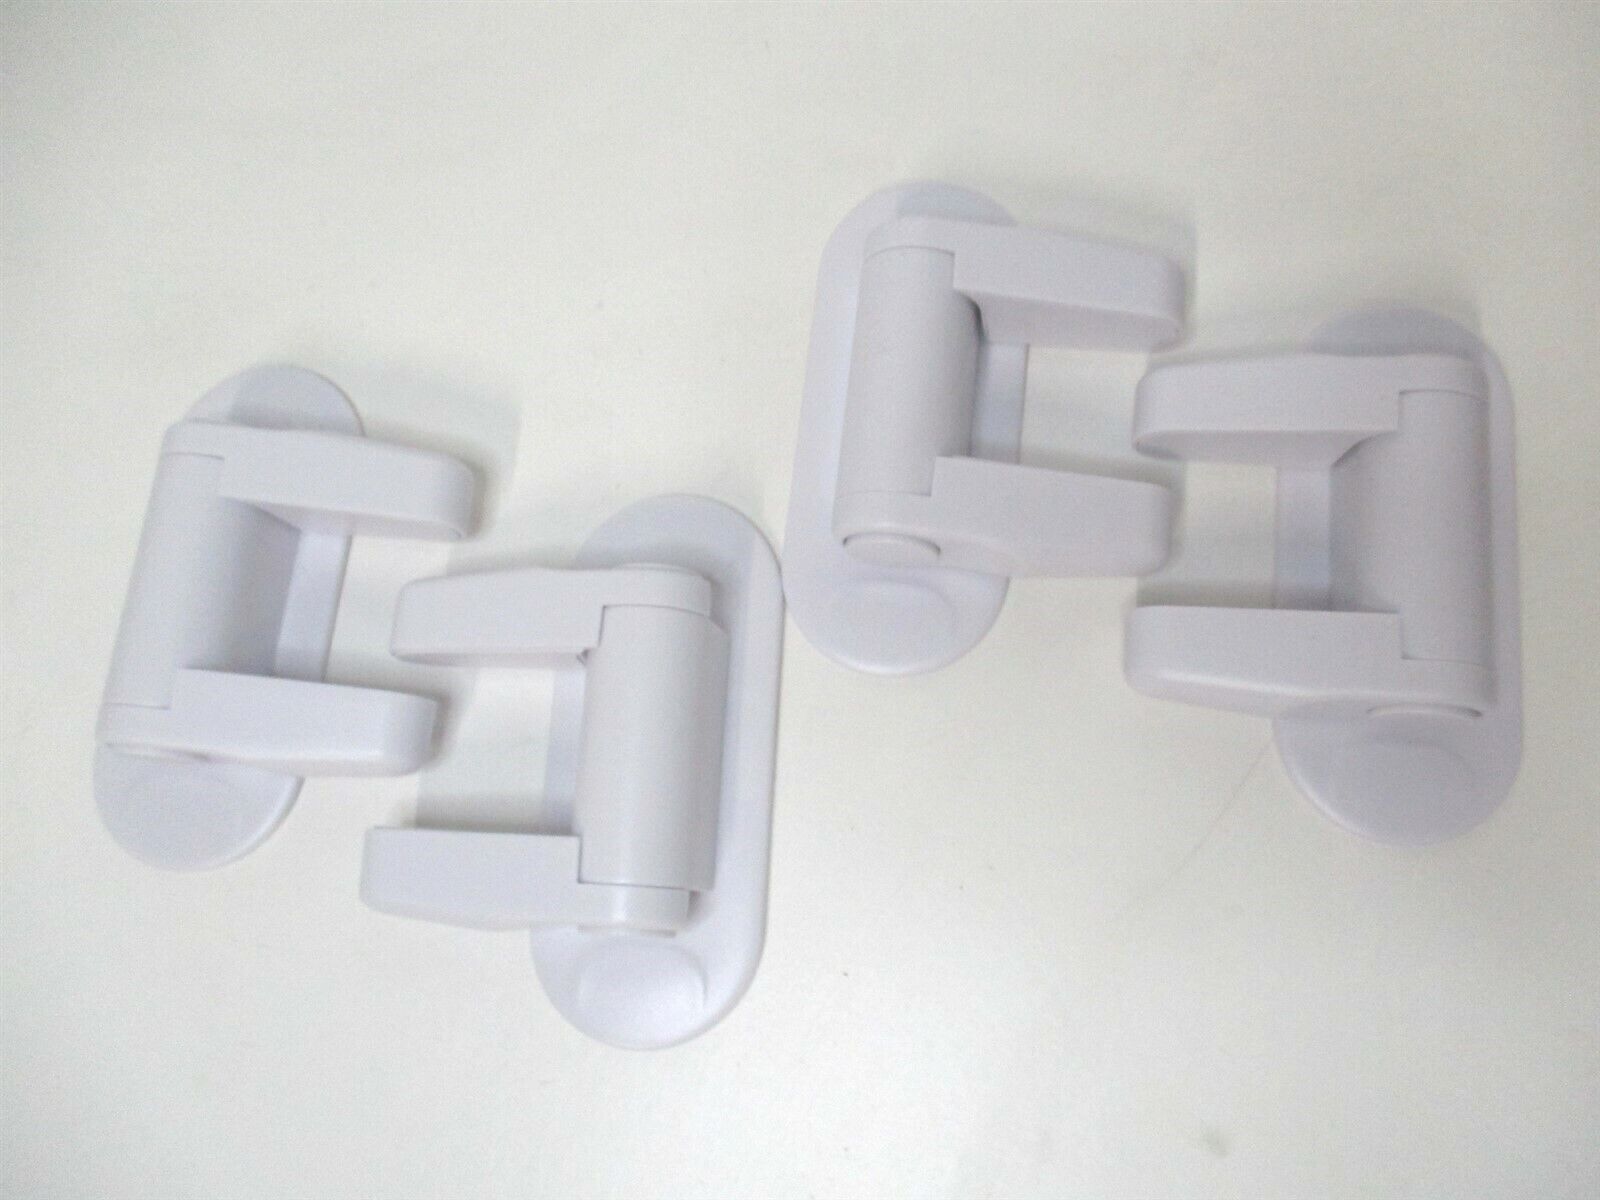 White Door Lever Lock Child Proof Doors & Handles 3M Adhesive - 4 Pack  Unbranded Does Not Apply